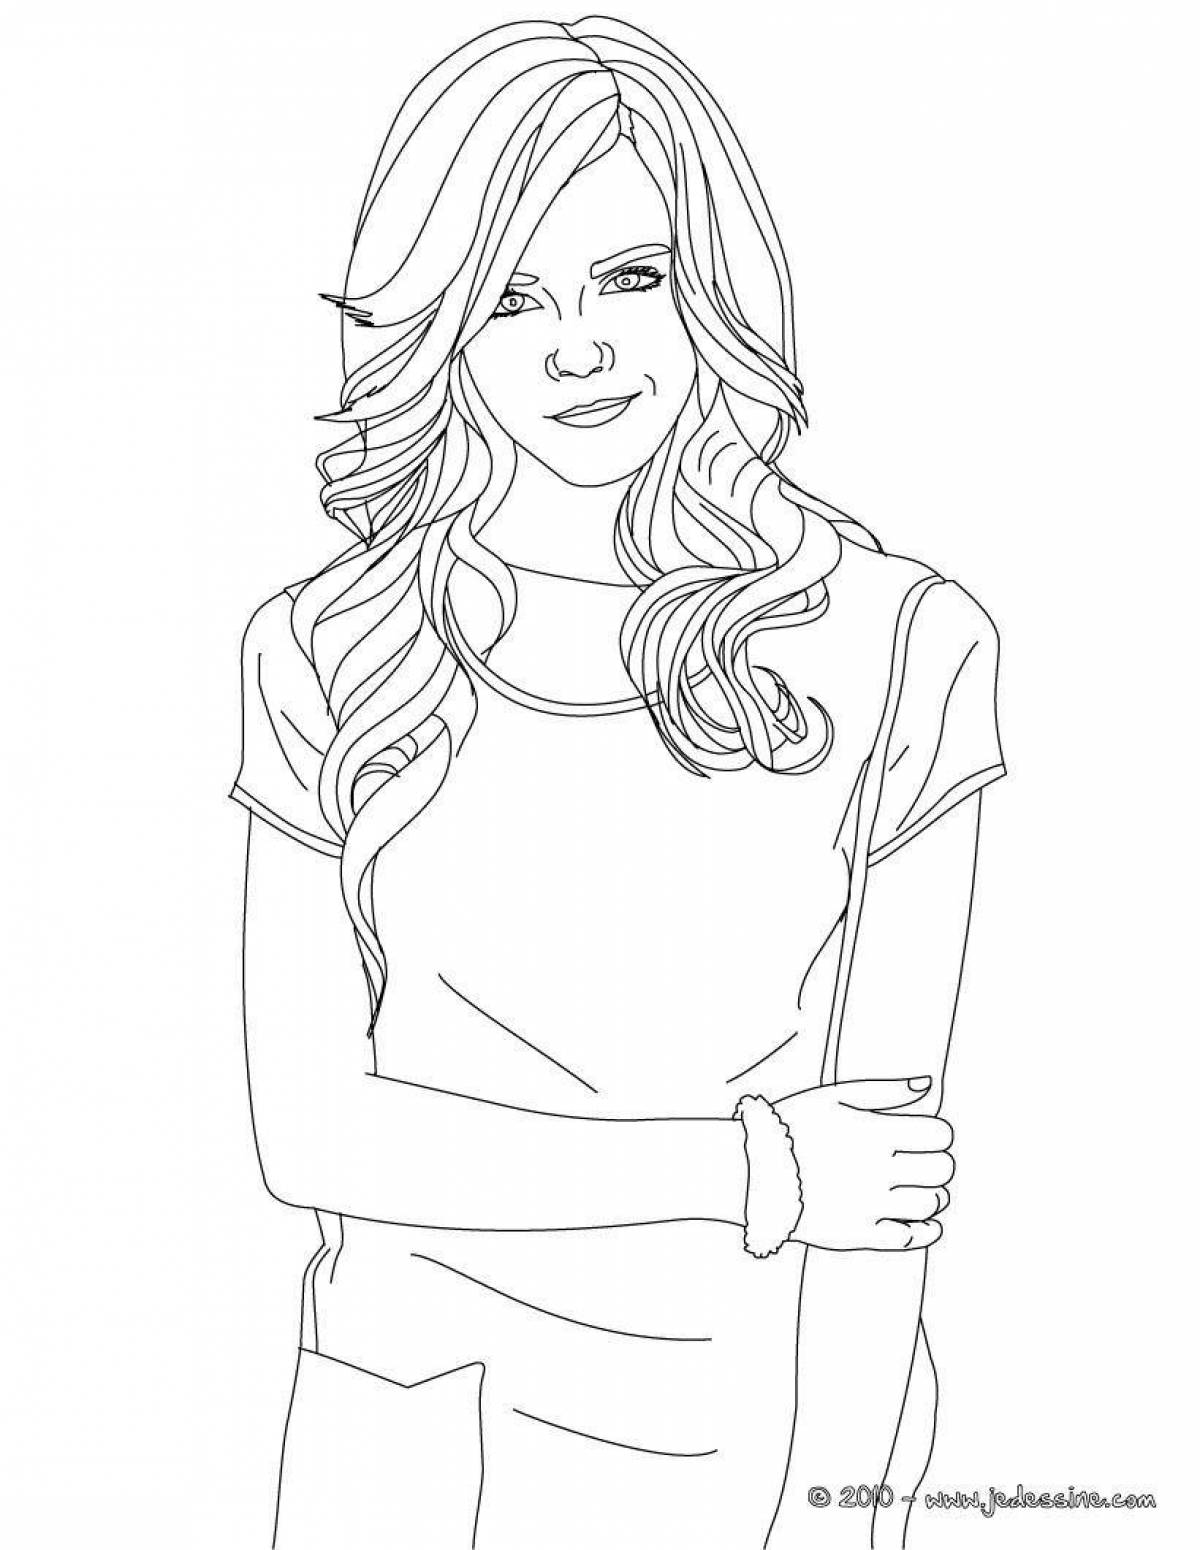 Coloring playful hermione granger